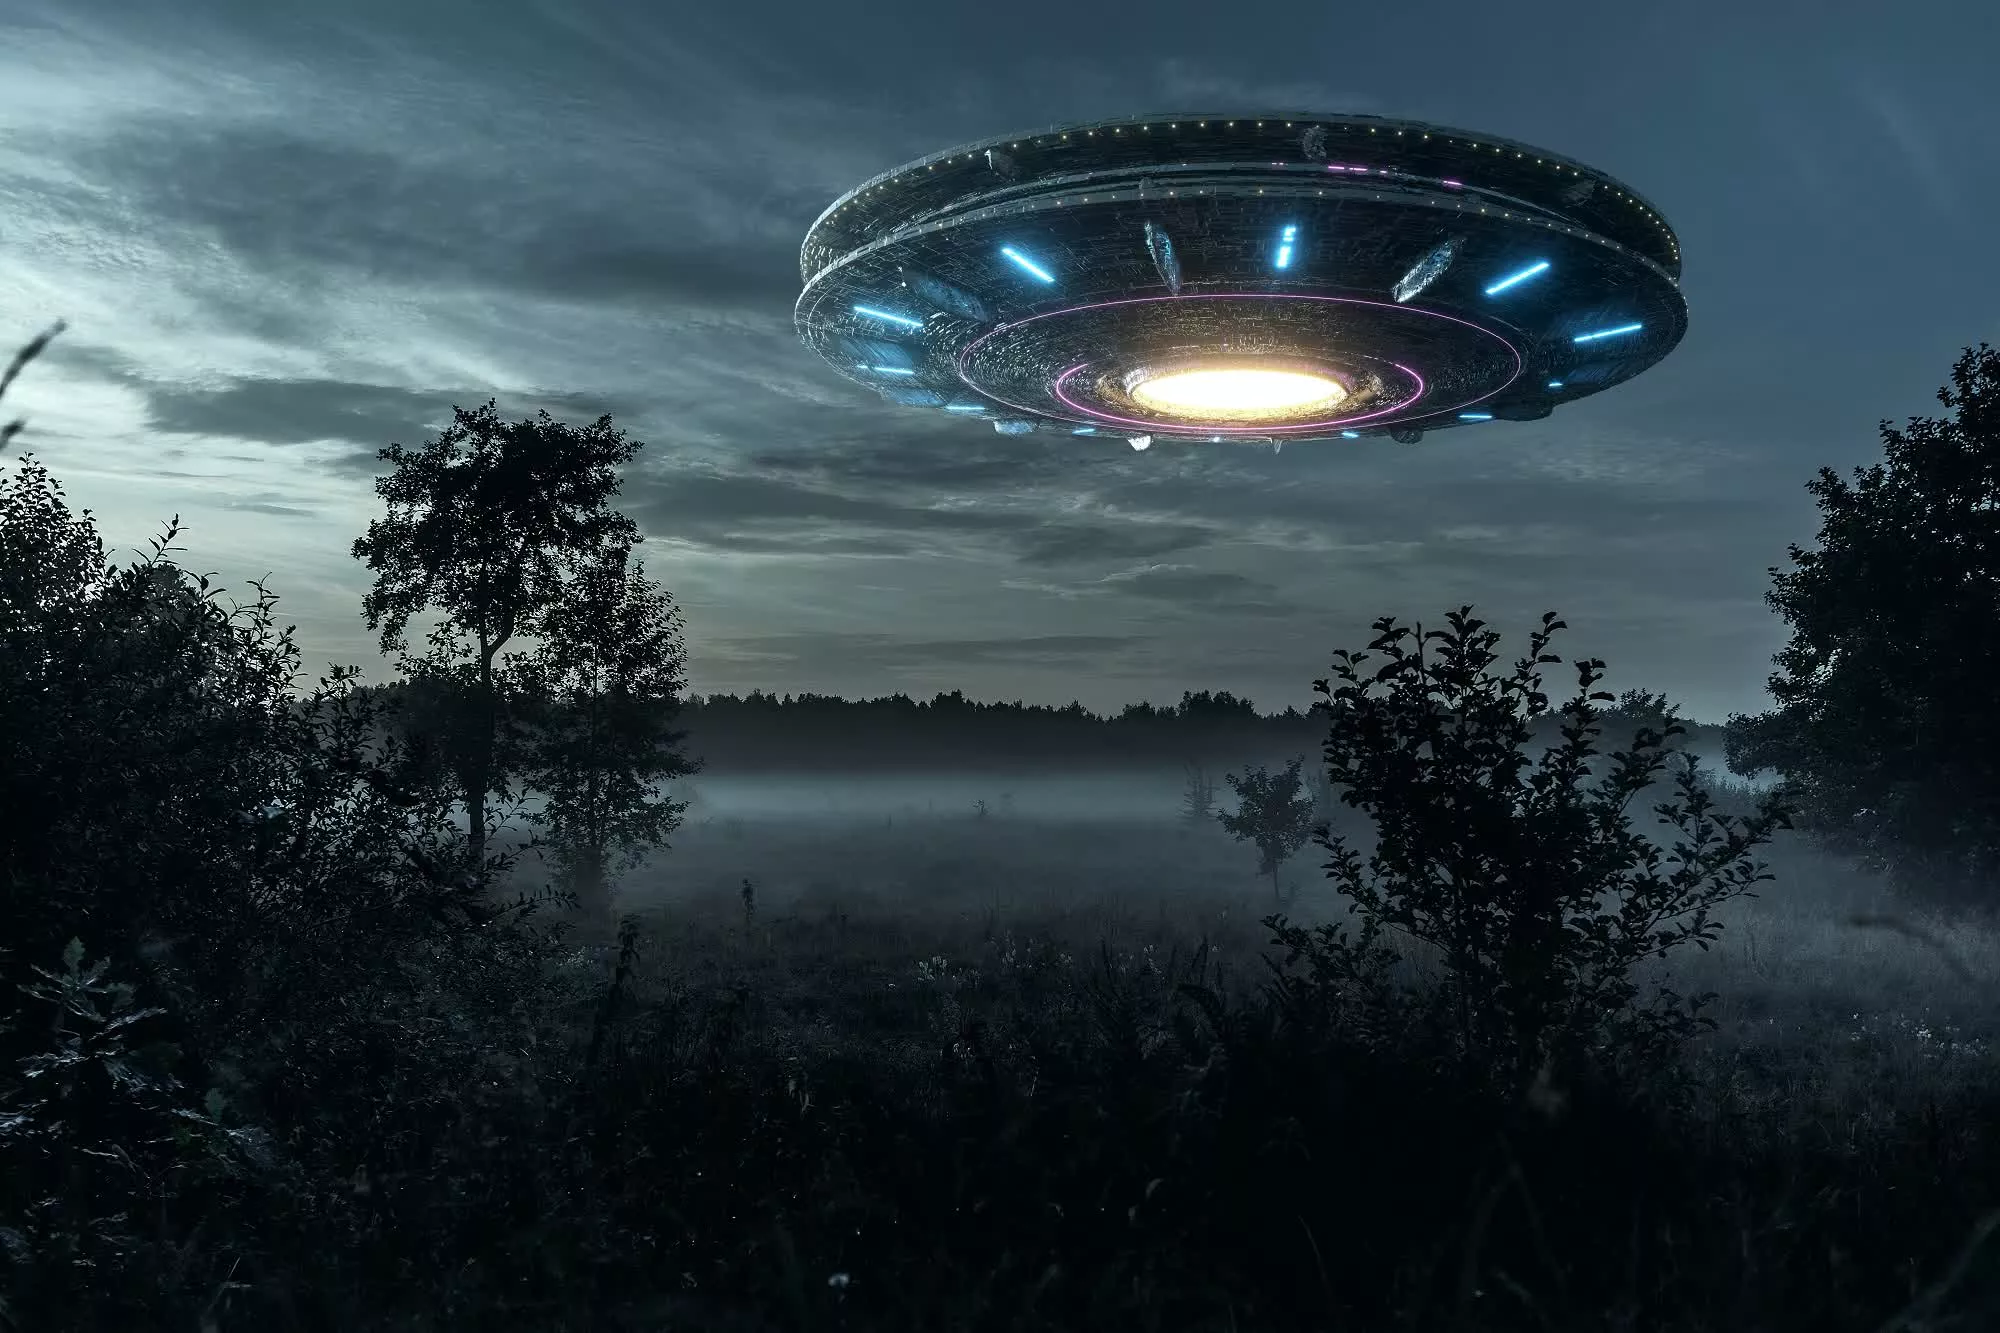 Former Israeli government official claims Galactic Federation of aliens is working with US in secret